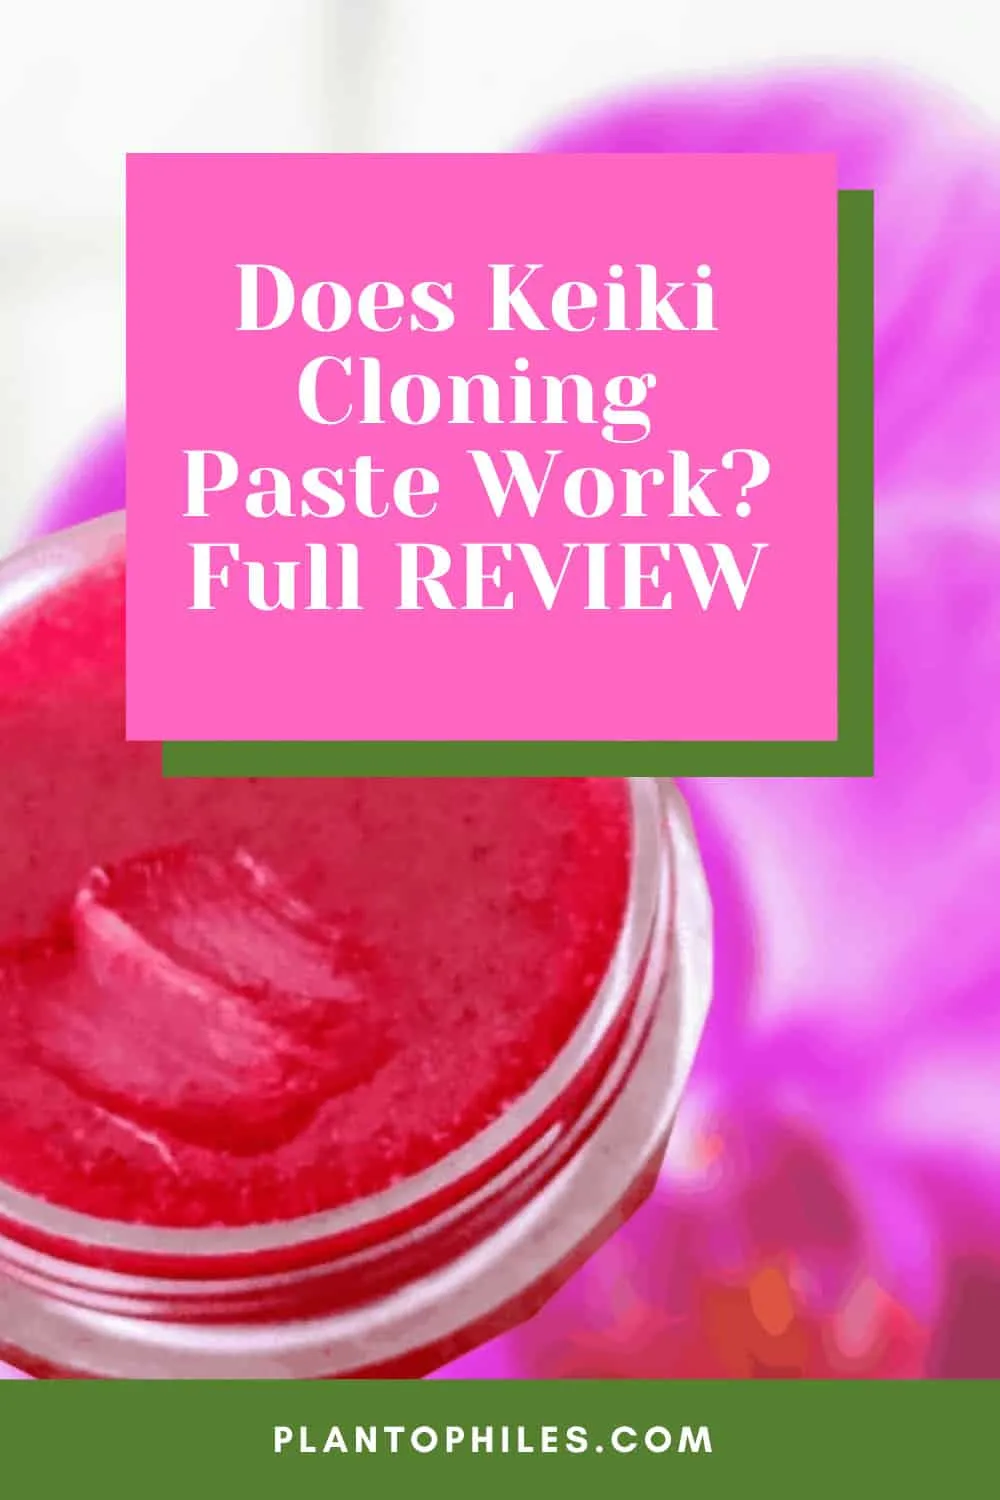 Does Keiki Cloning Paste Work Full REVIEW